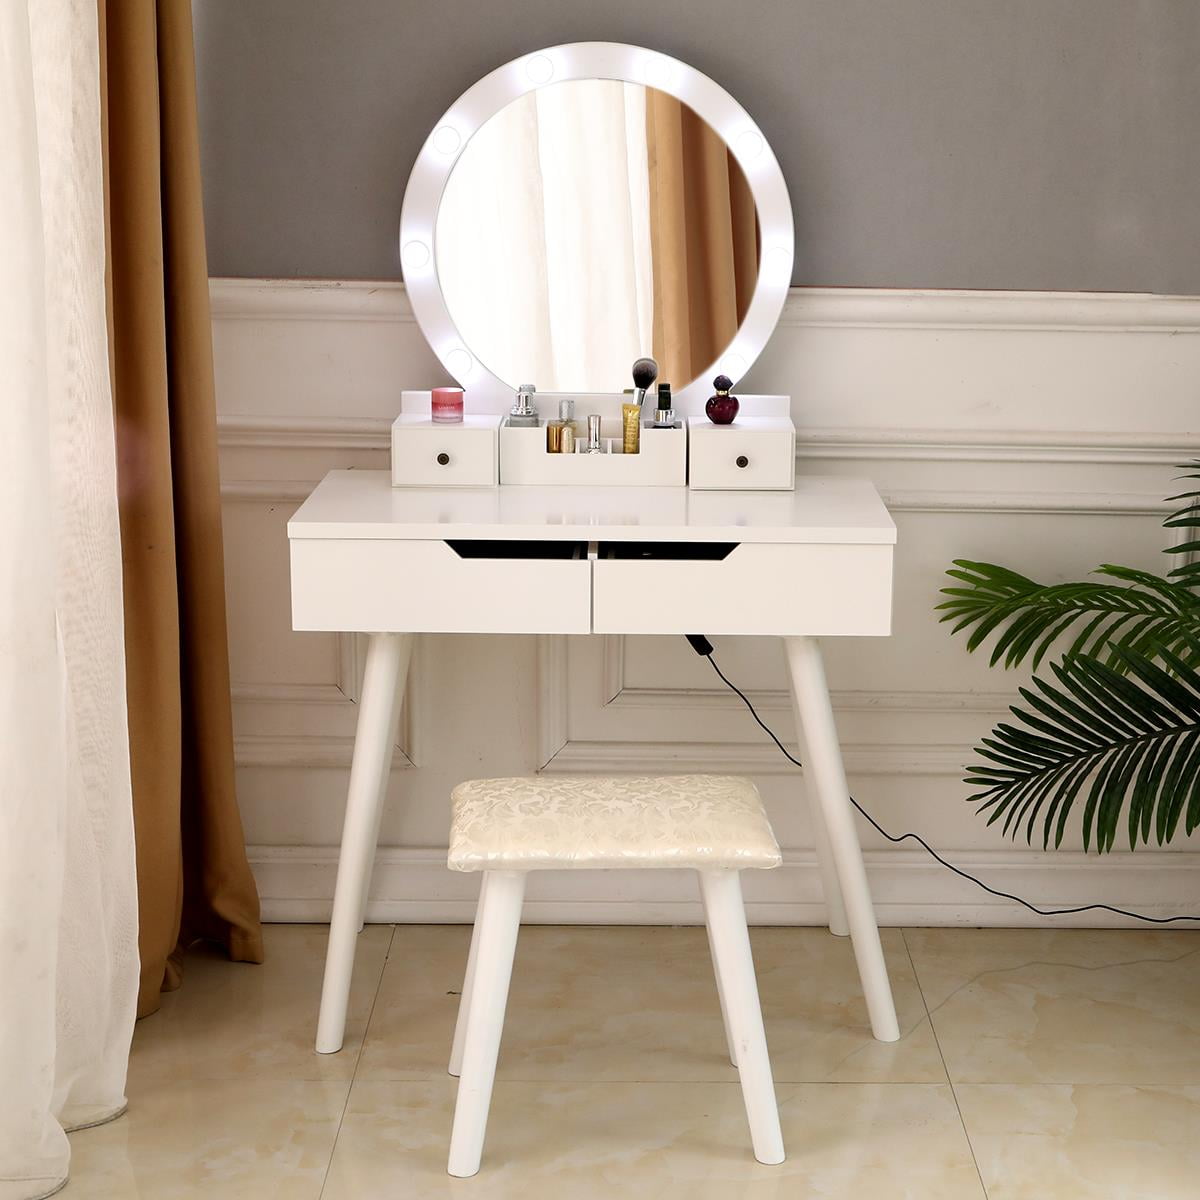 Salonmore Vanity Table Set With Lighted, White Vanity With Round Mirror